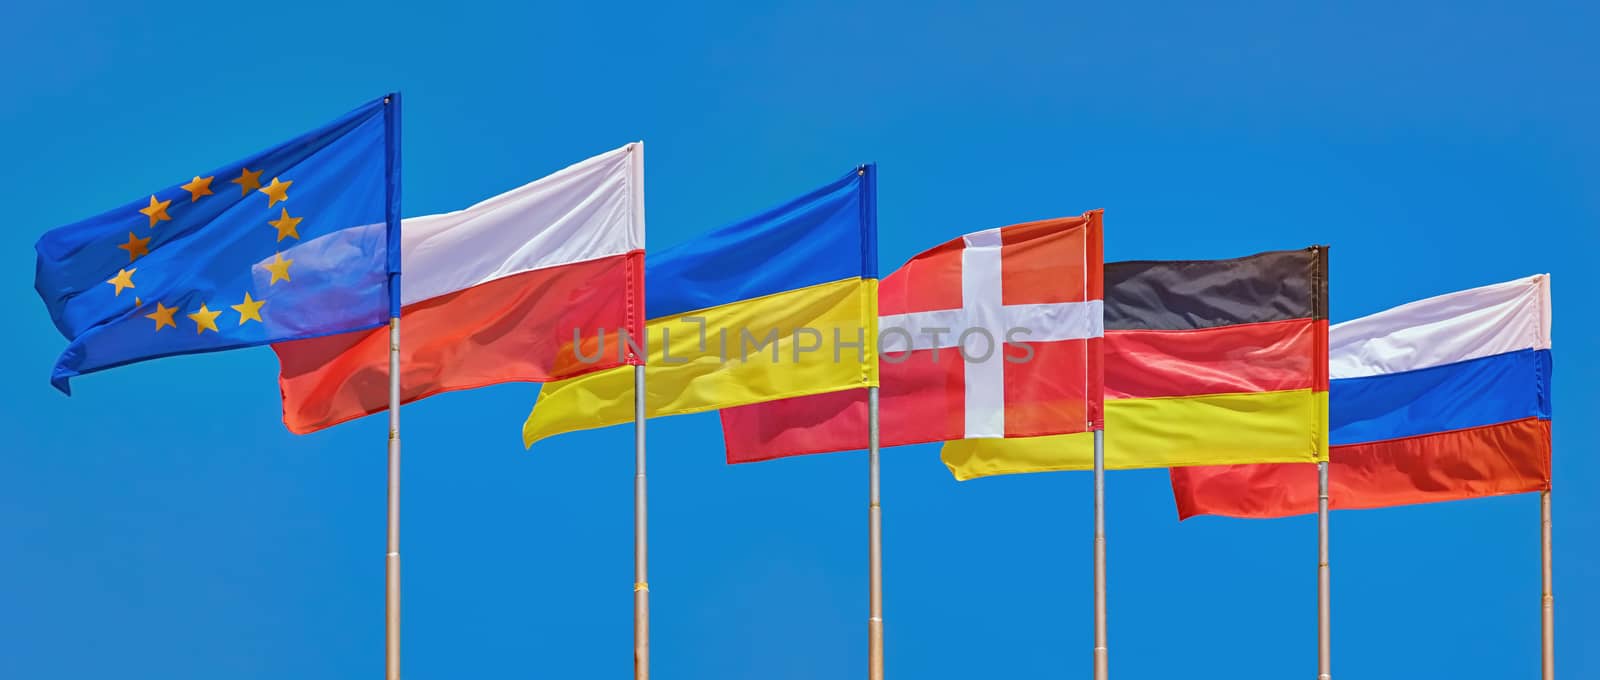 Flags of Different Countries by SNR